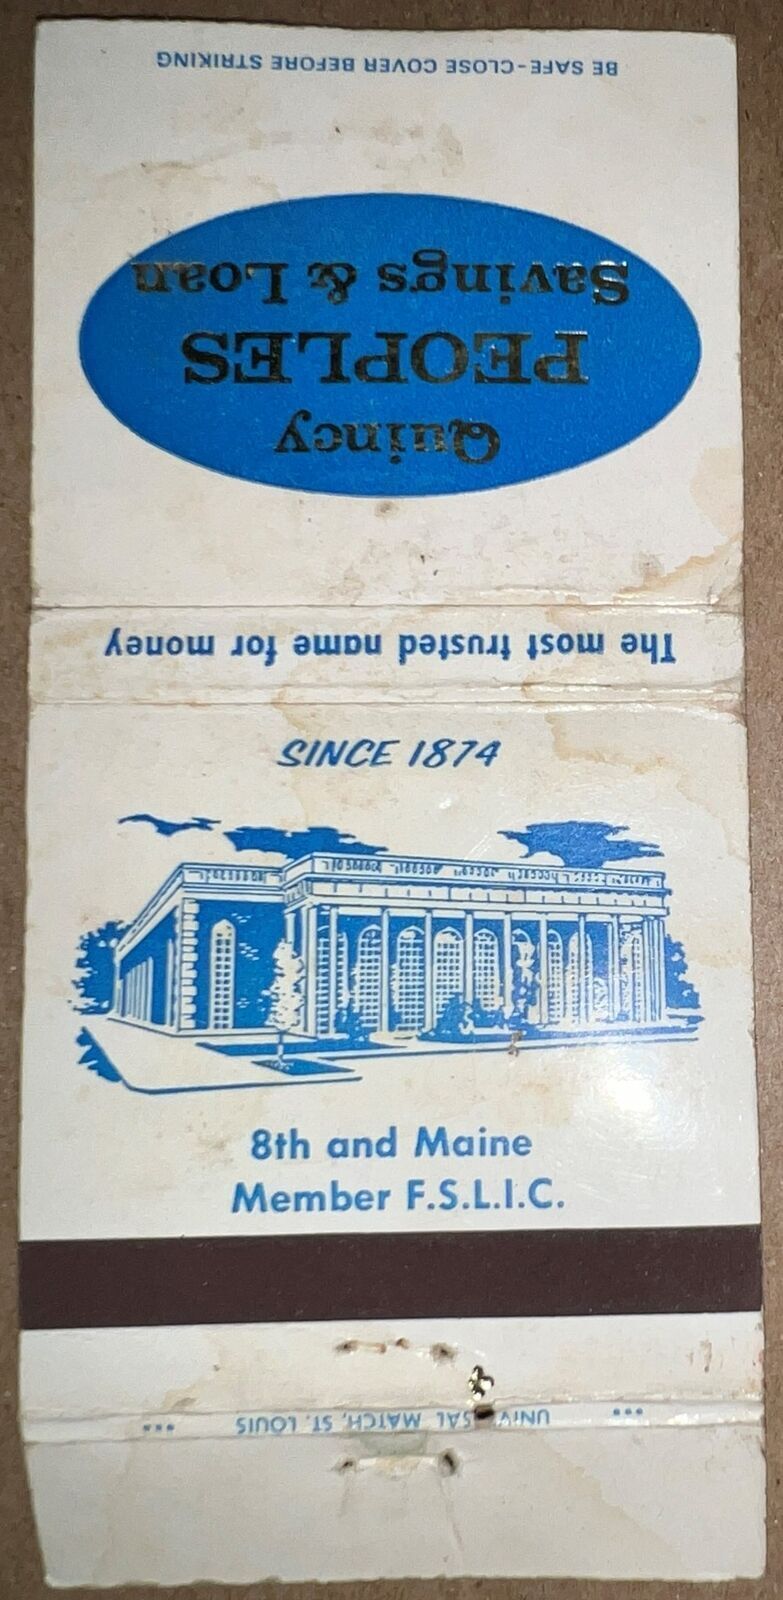 Quincy Peoples Savings & Loan Bank Quincy IL Illinois Vintage Matchbook Cover